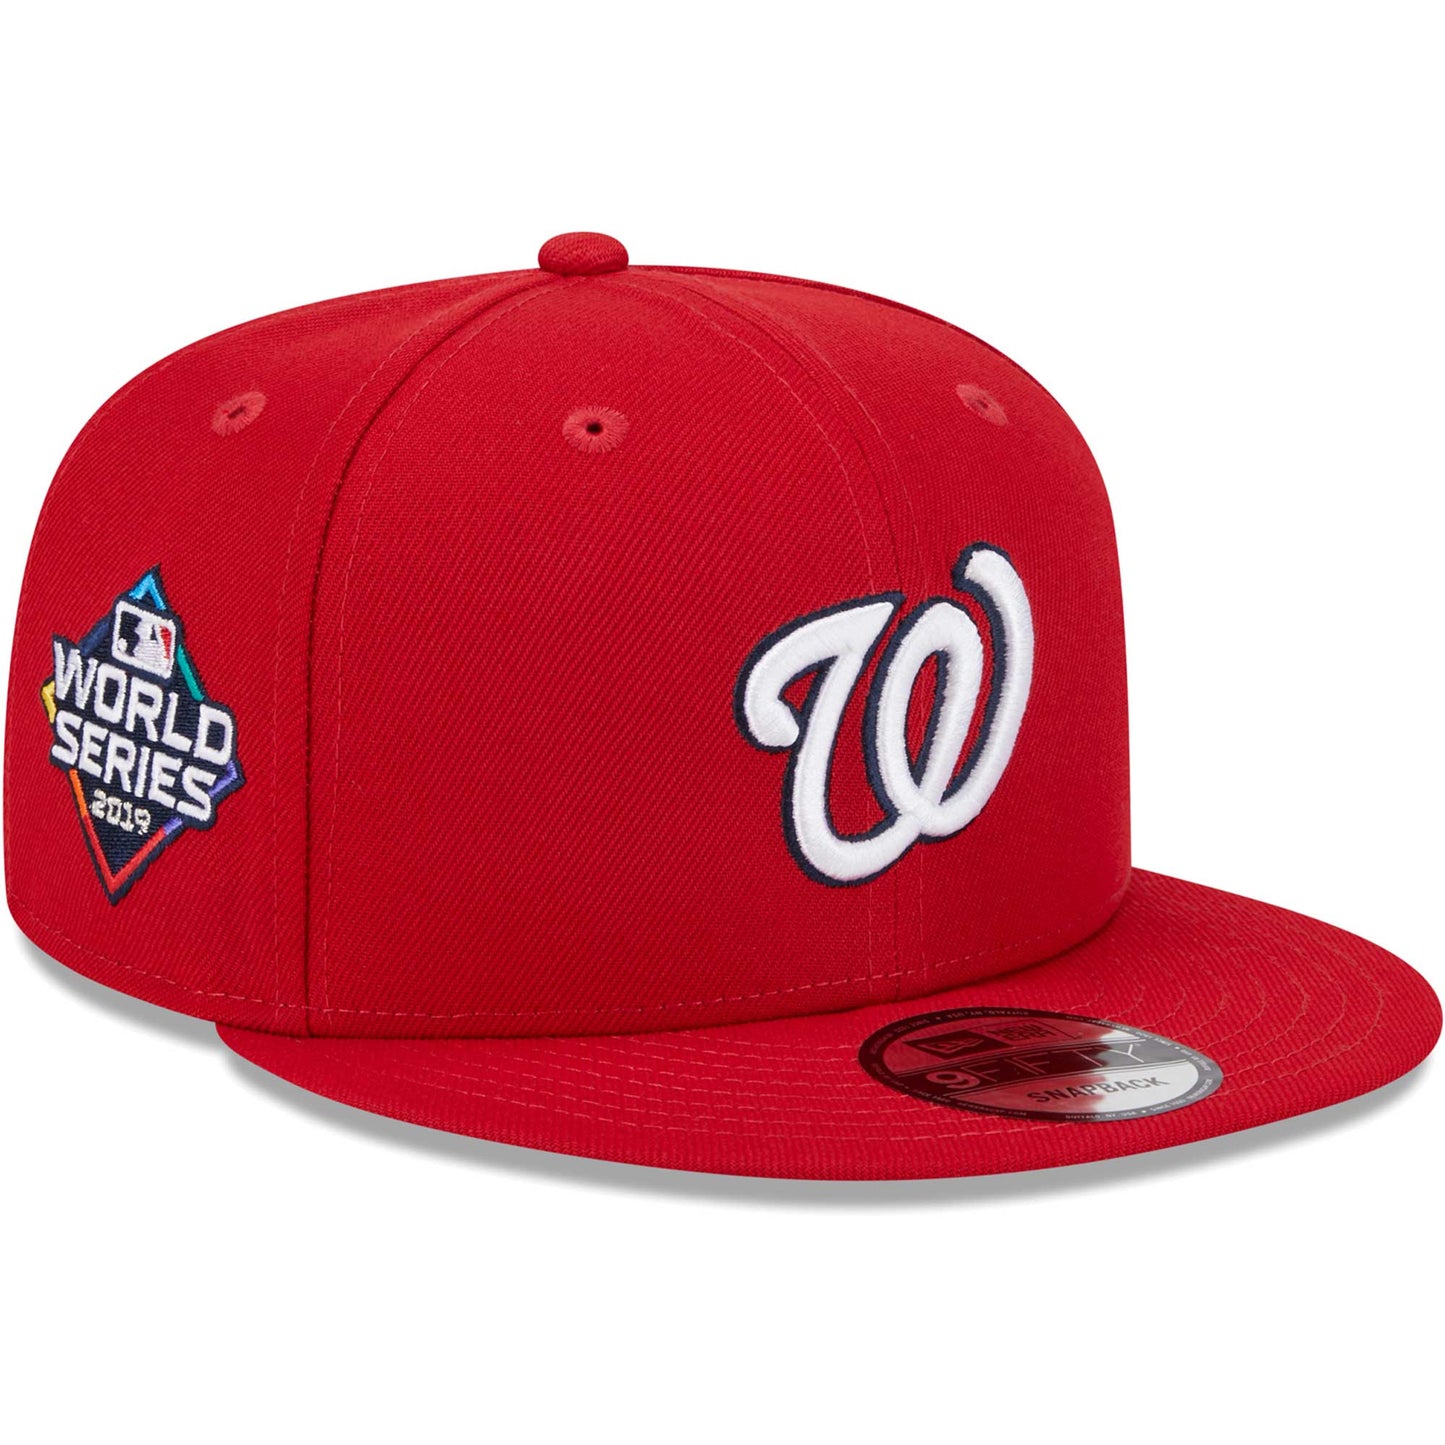 Washington Nationals New Era 2019 World Series Side Patch 9FIFTY Snapback Hat - Red